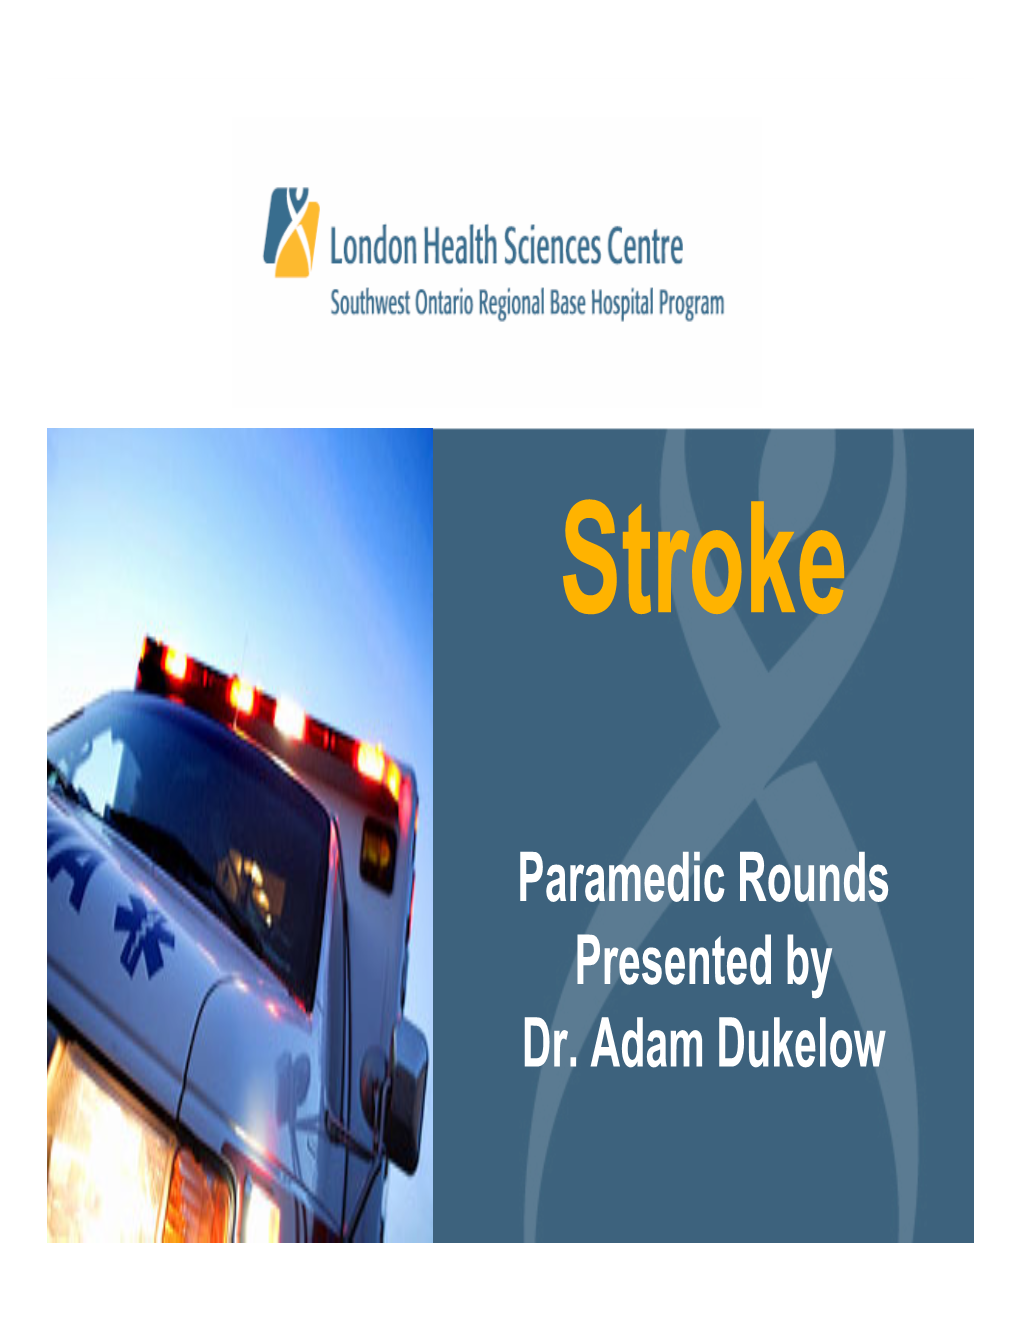 Paramedic Rounds Presented by Dr. Adam Dukelow Case Study 1